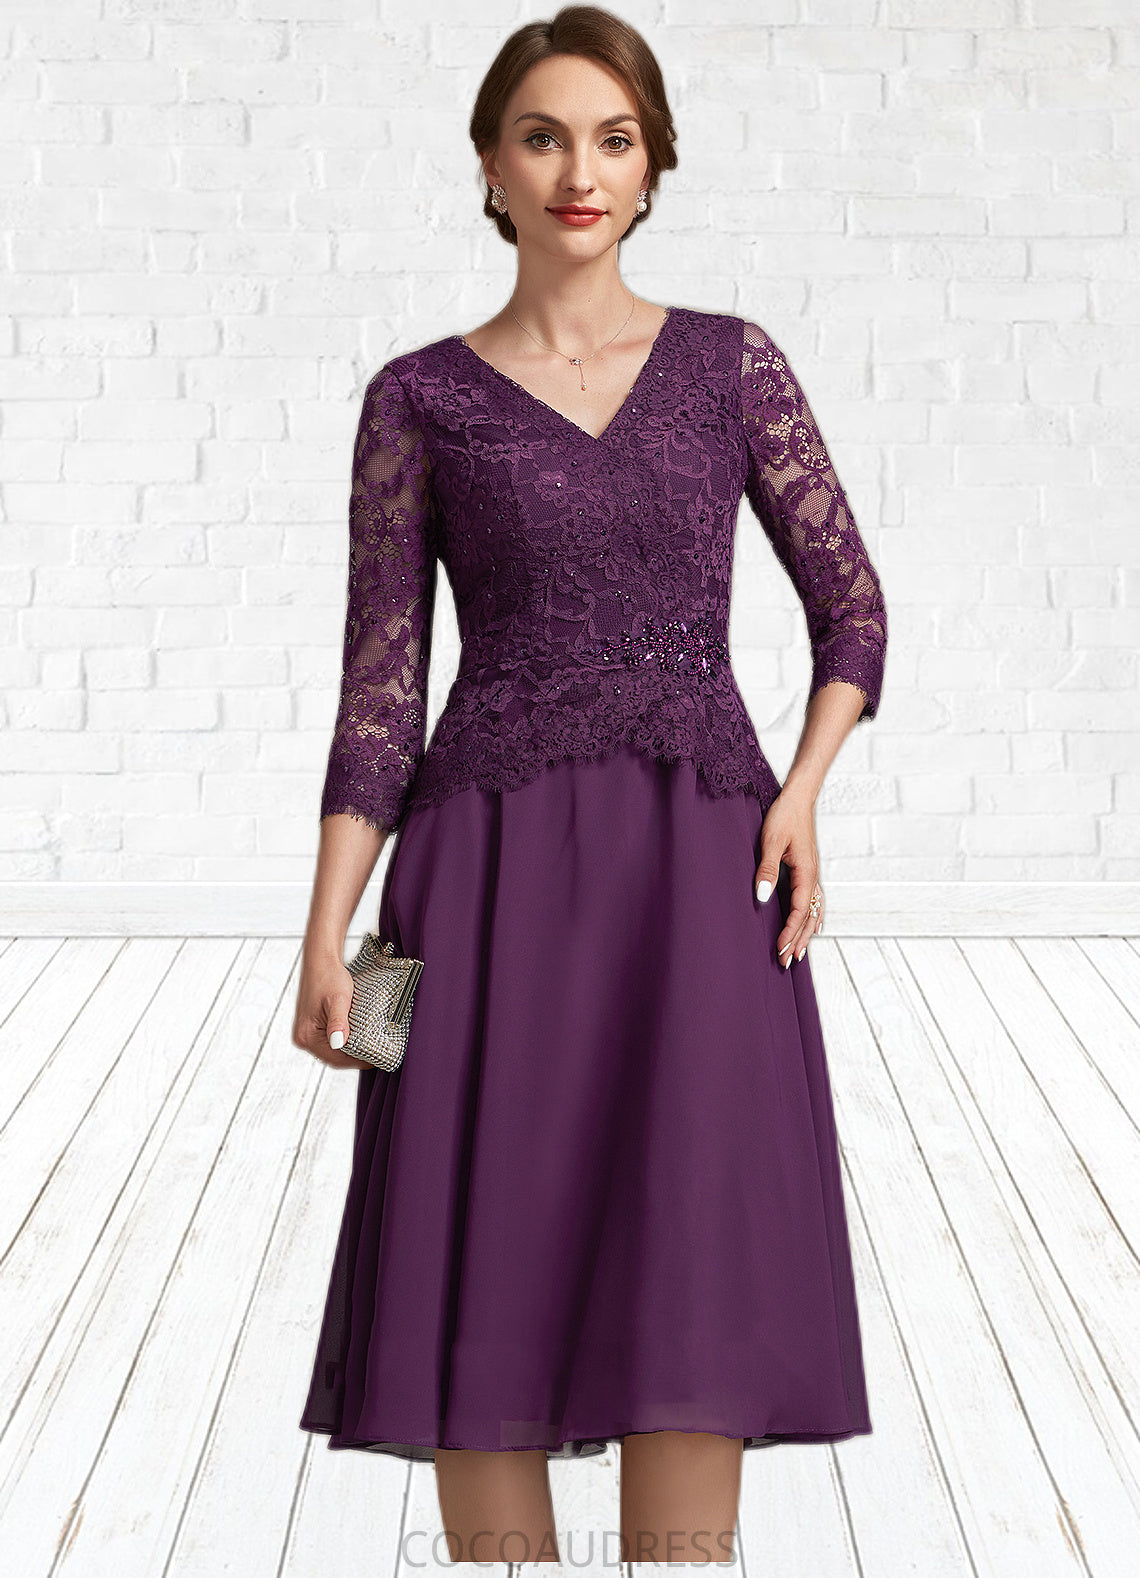 Jamie A-Line V-neck Knee-Length Chiffon Lace Mother of the Bride Dress With Beading Sequins 126P0015035